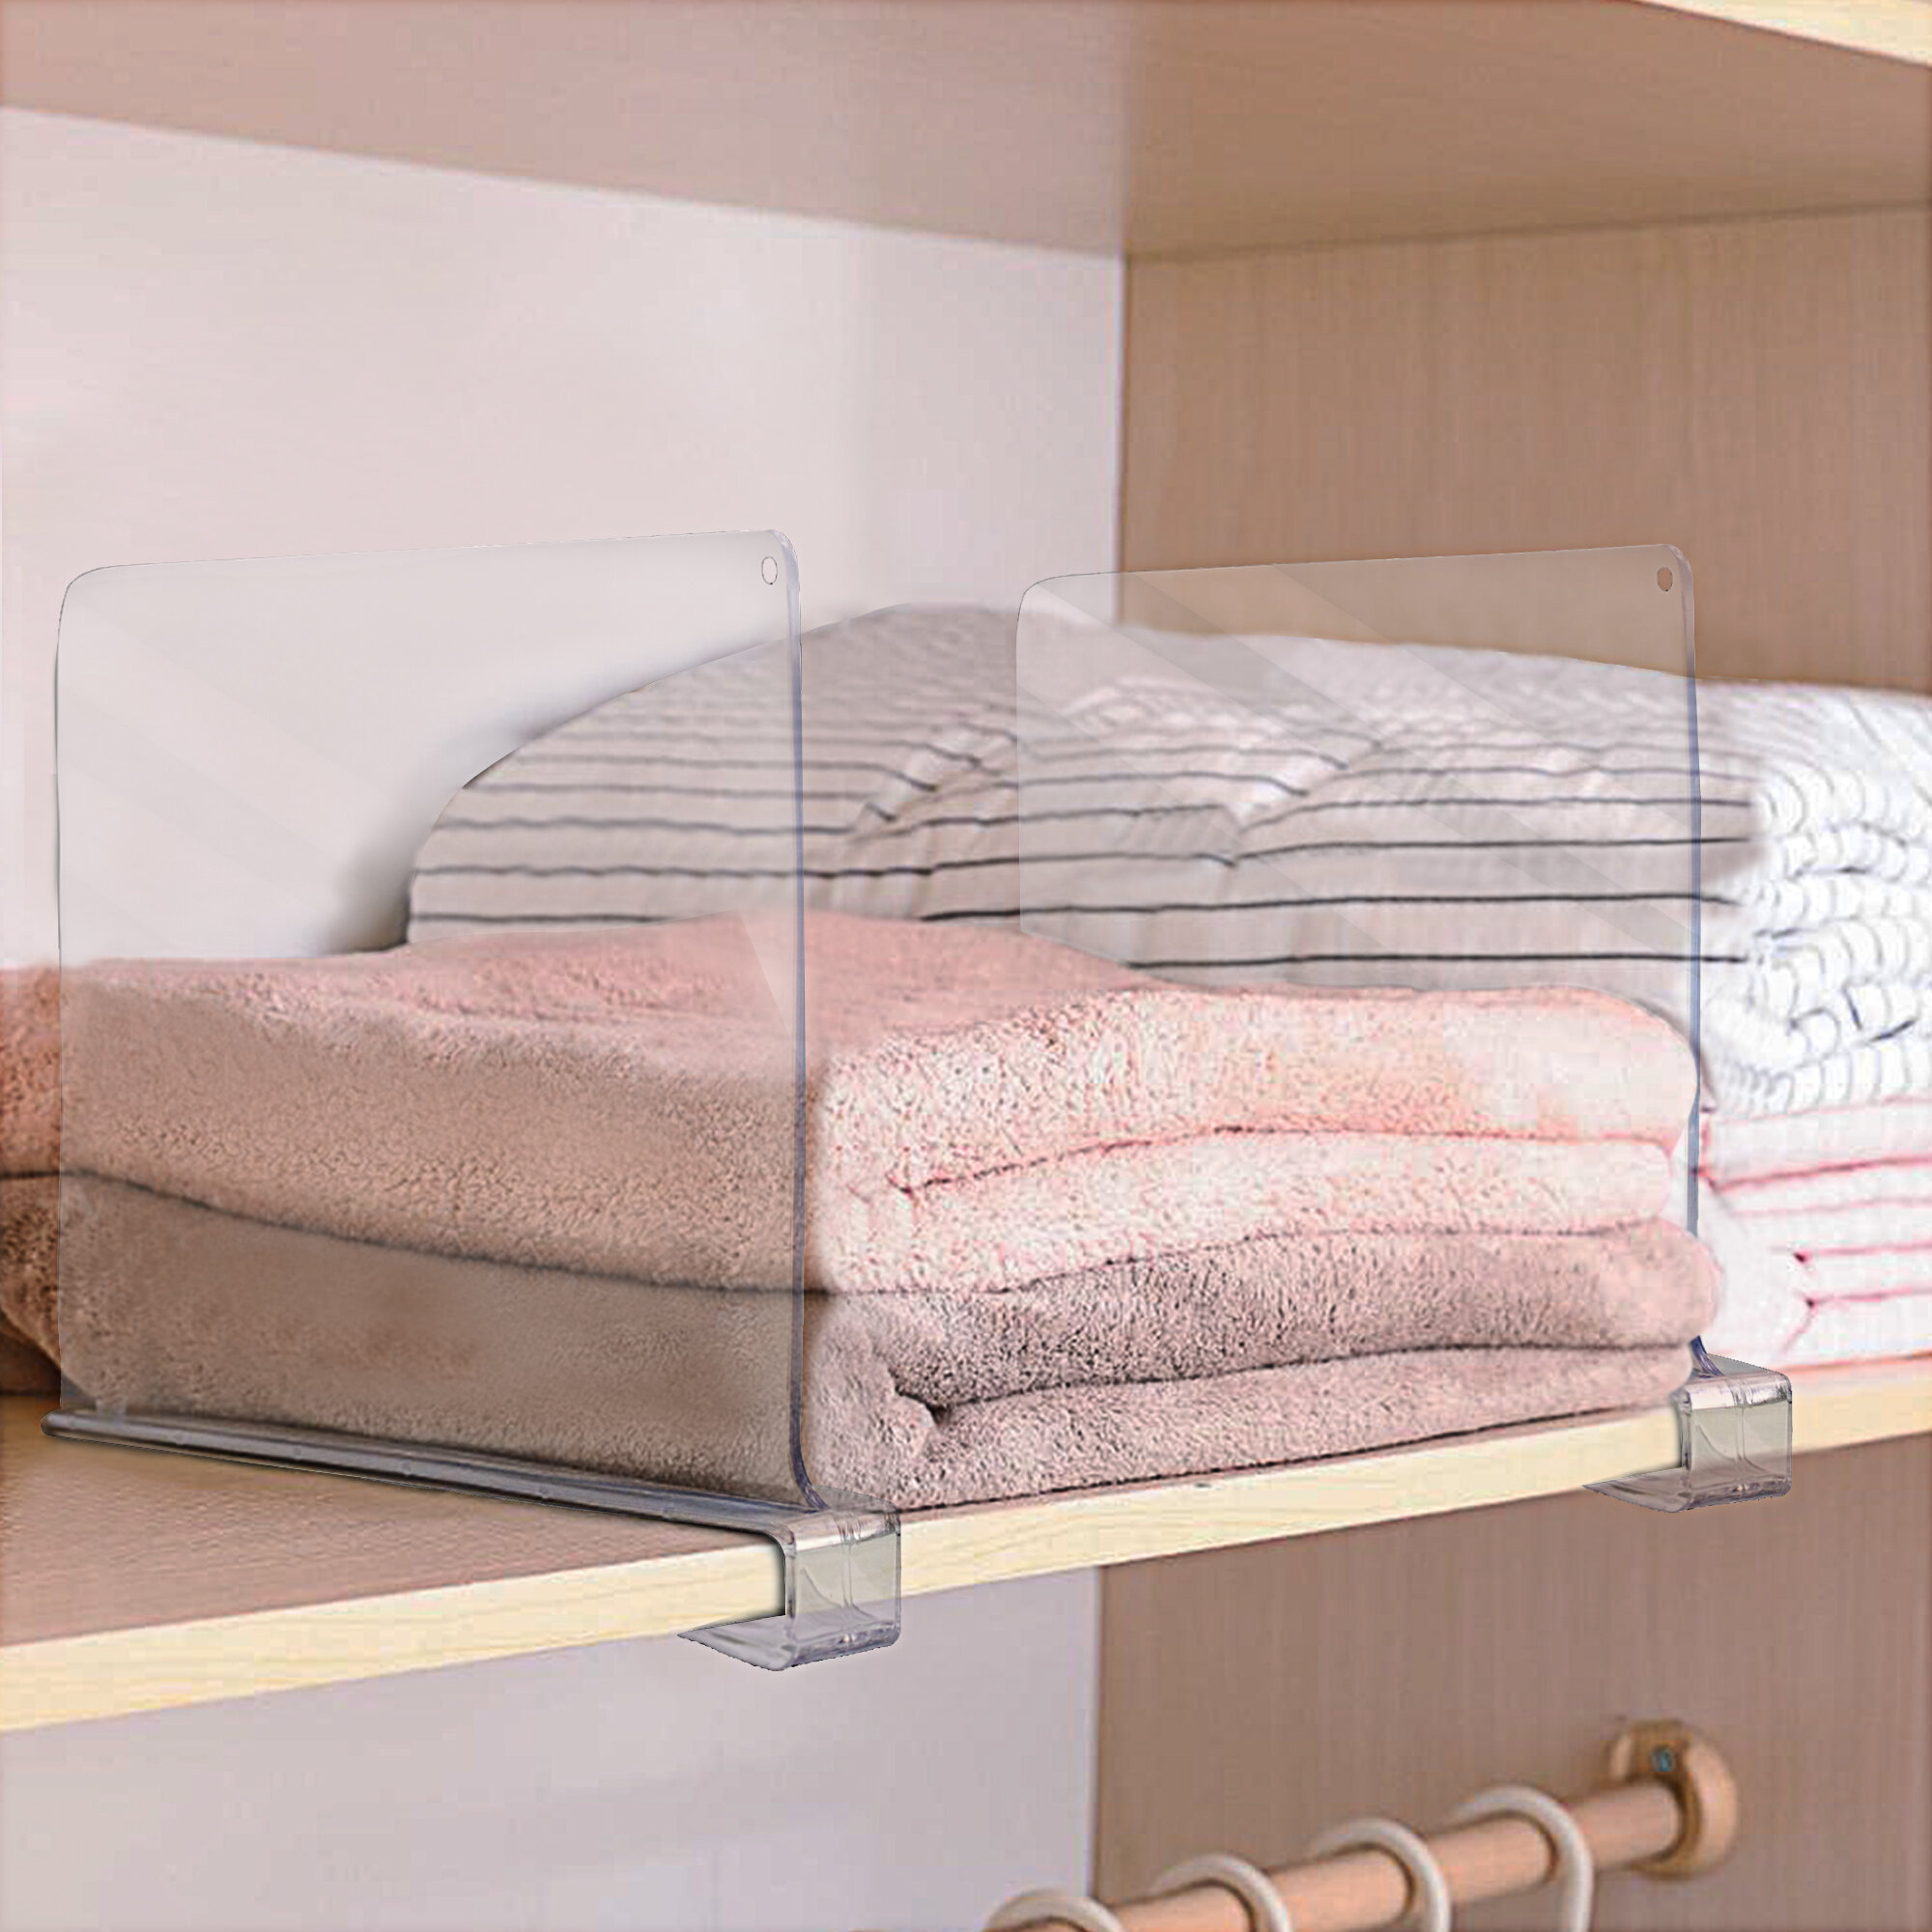 Acrylic Shelf Dividers - The Buy Guide